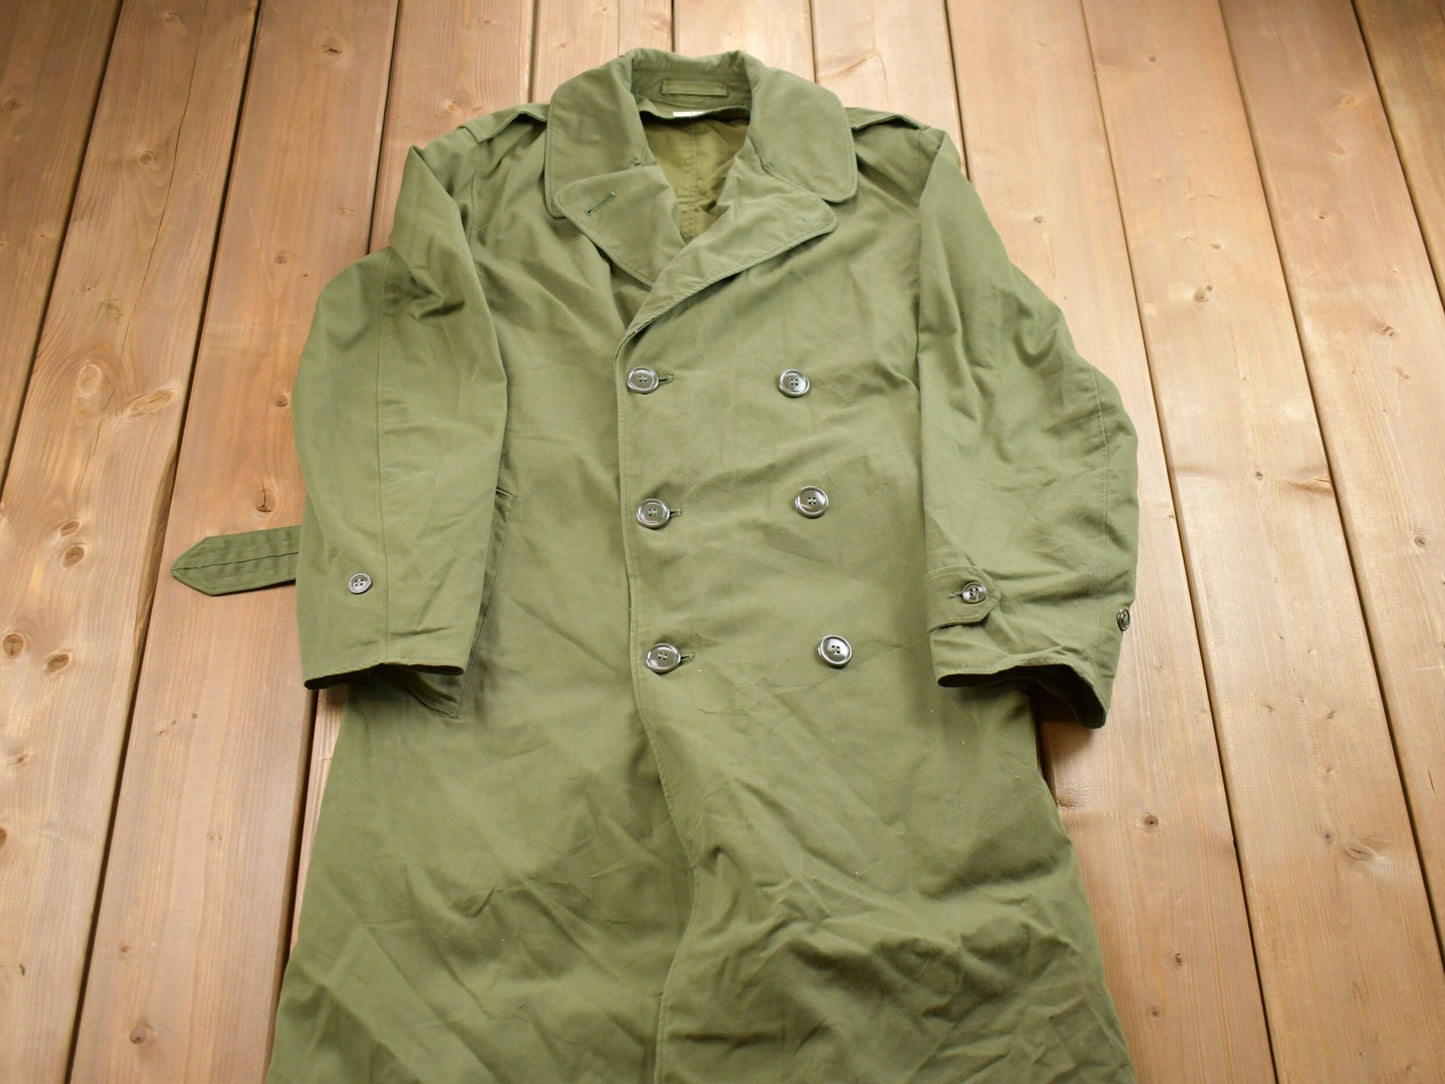 Vintage 1960s Military Parka Overcoat / Button Up Jacket / US Army Green / Vintage Army / Army Jacket / Military Full Length Parka